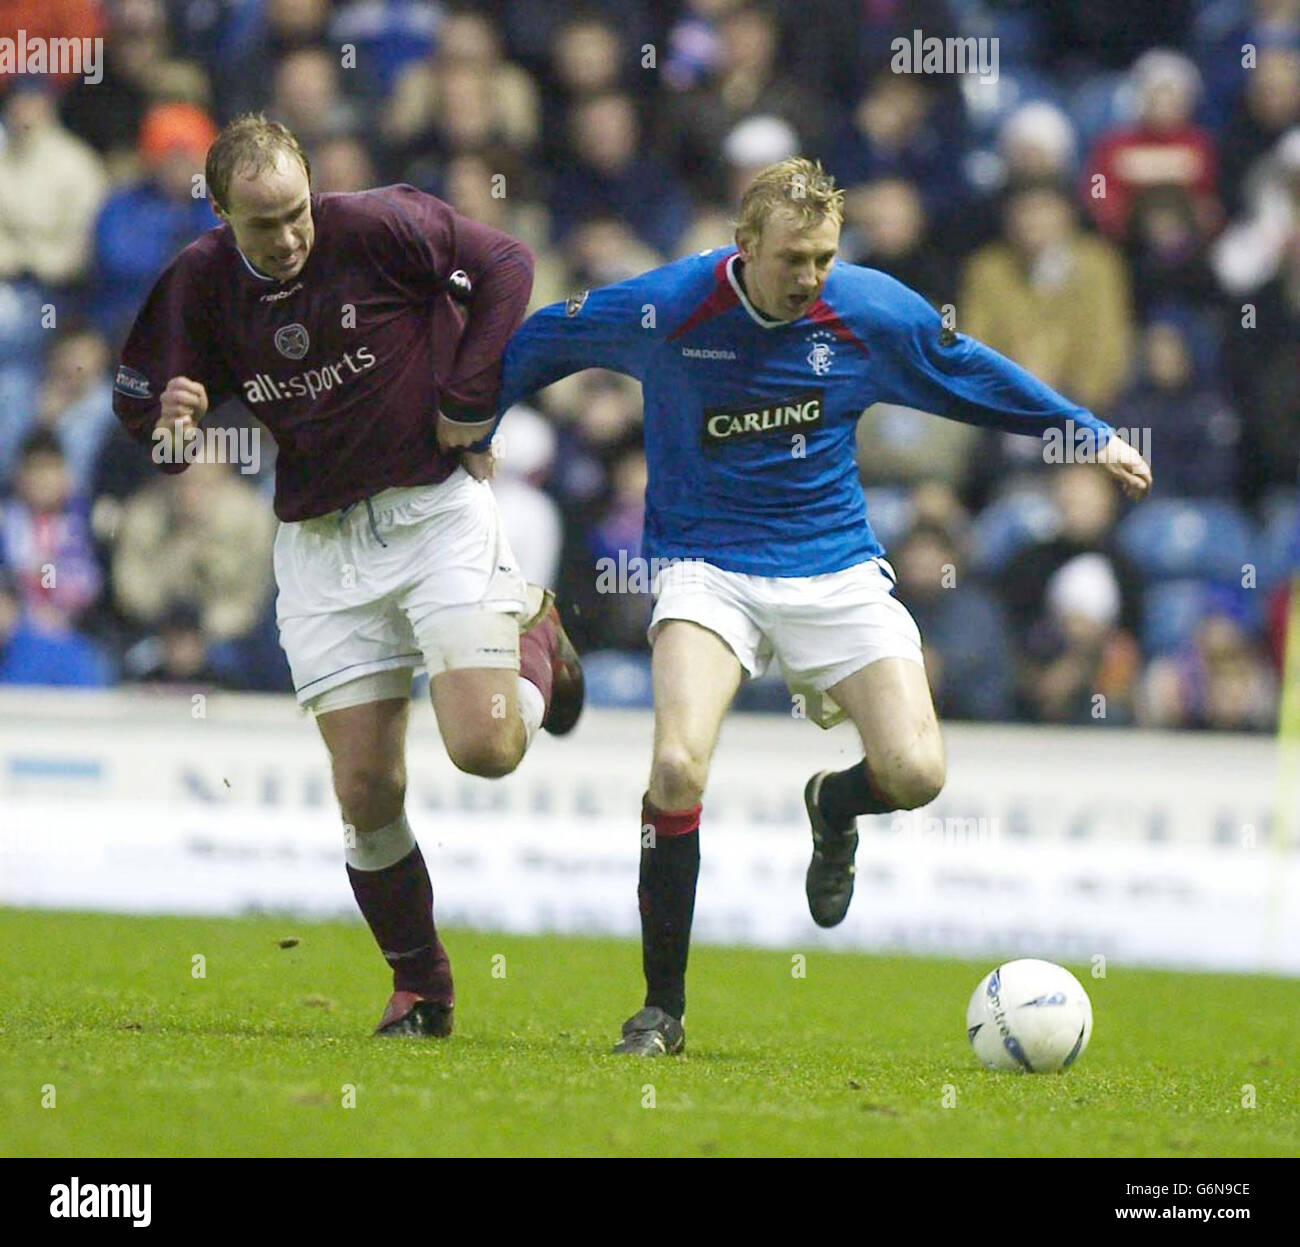 : Hearts player Neil MacFarlane (left) attempts to tackle Rangers Stephen Hughes, during their Bank of Scotland Scottish Premiership match at Rangers' Ibrox Stadium in Glasgow. Final score Rangers 2, Hearts 1. Stock Photo